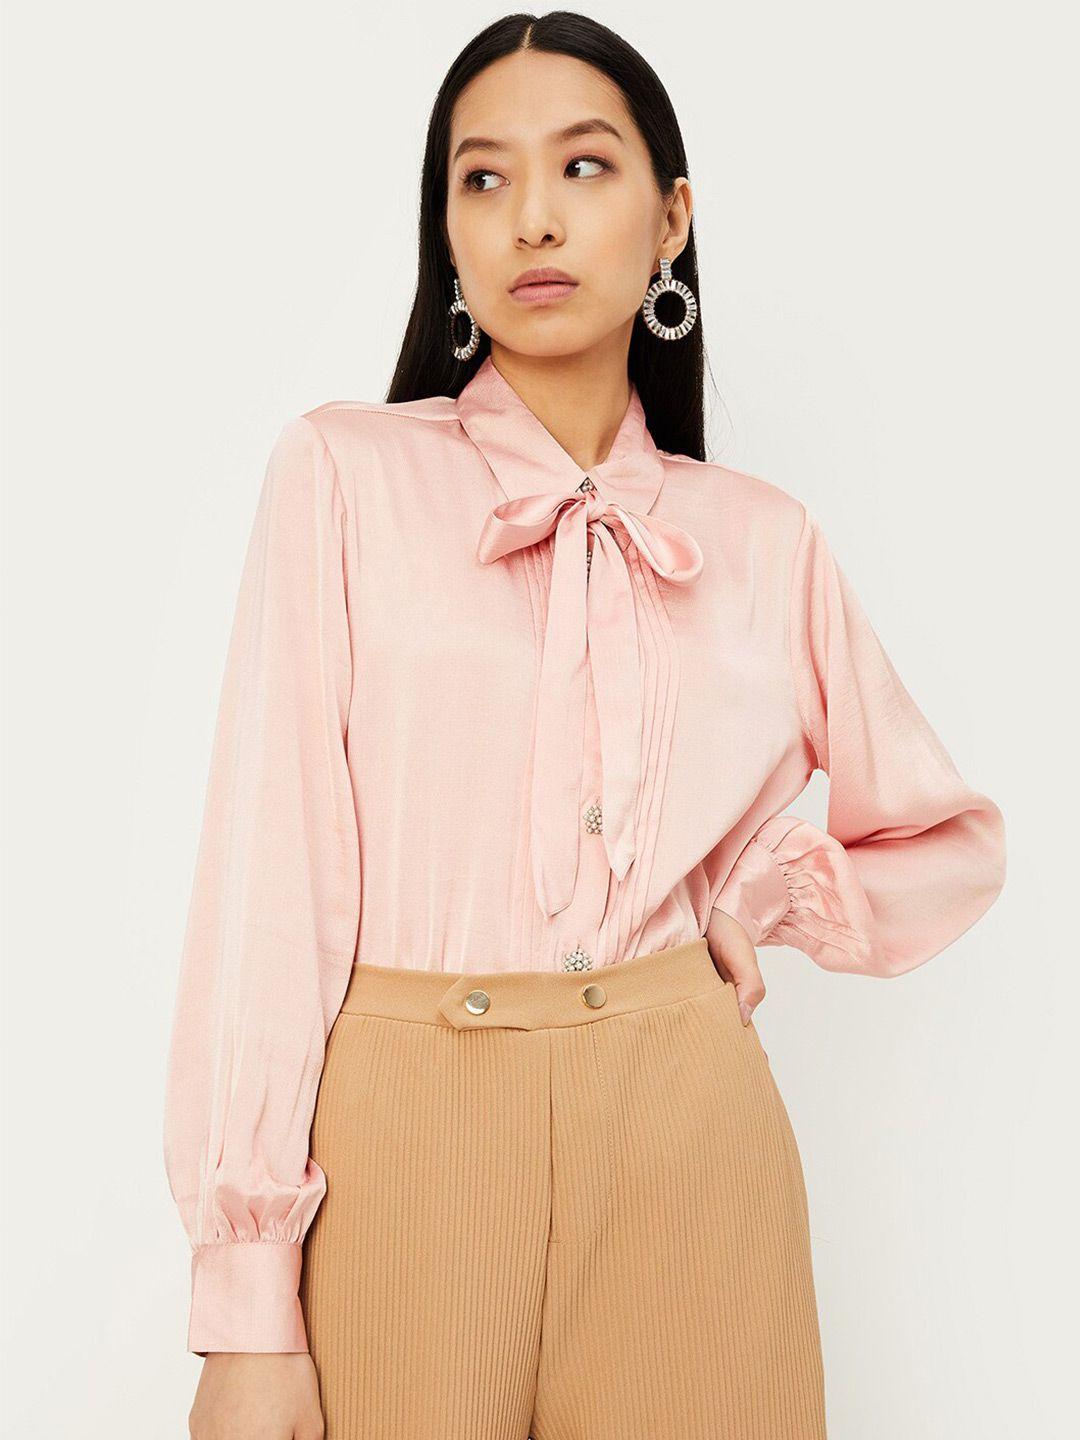 max tie-up neck cuffed sleeves pleated shirt style top